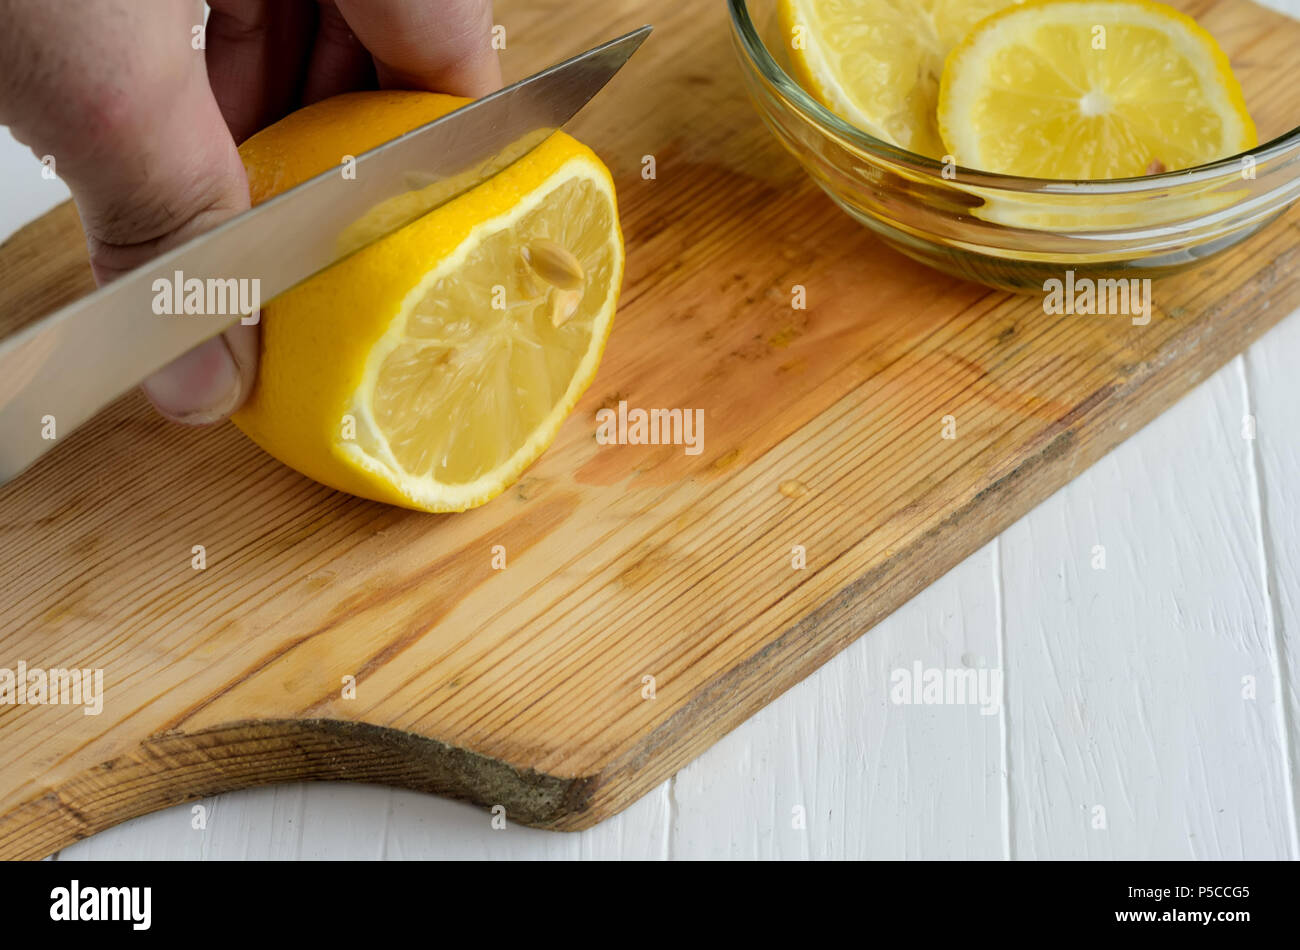 Someone cutting a lemon on the chopping board.Two slices of lemon into glass plate are top right angle. Stock Photo